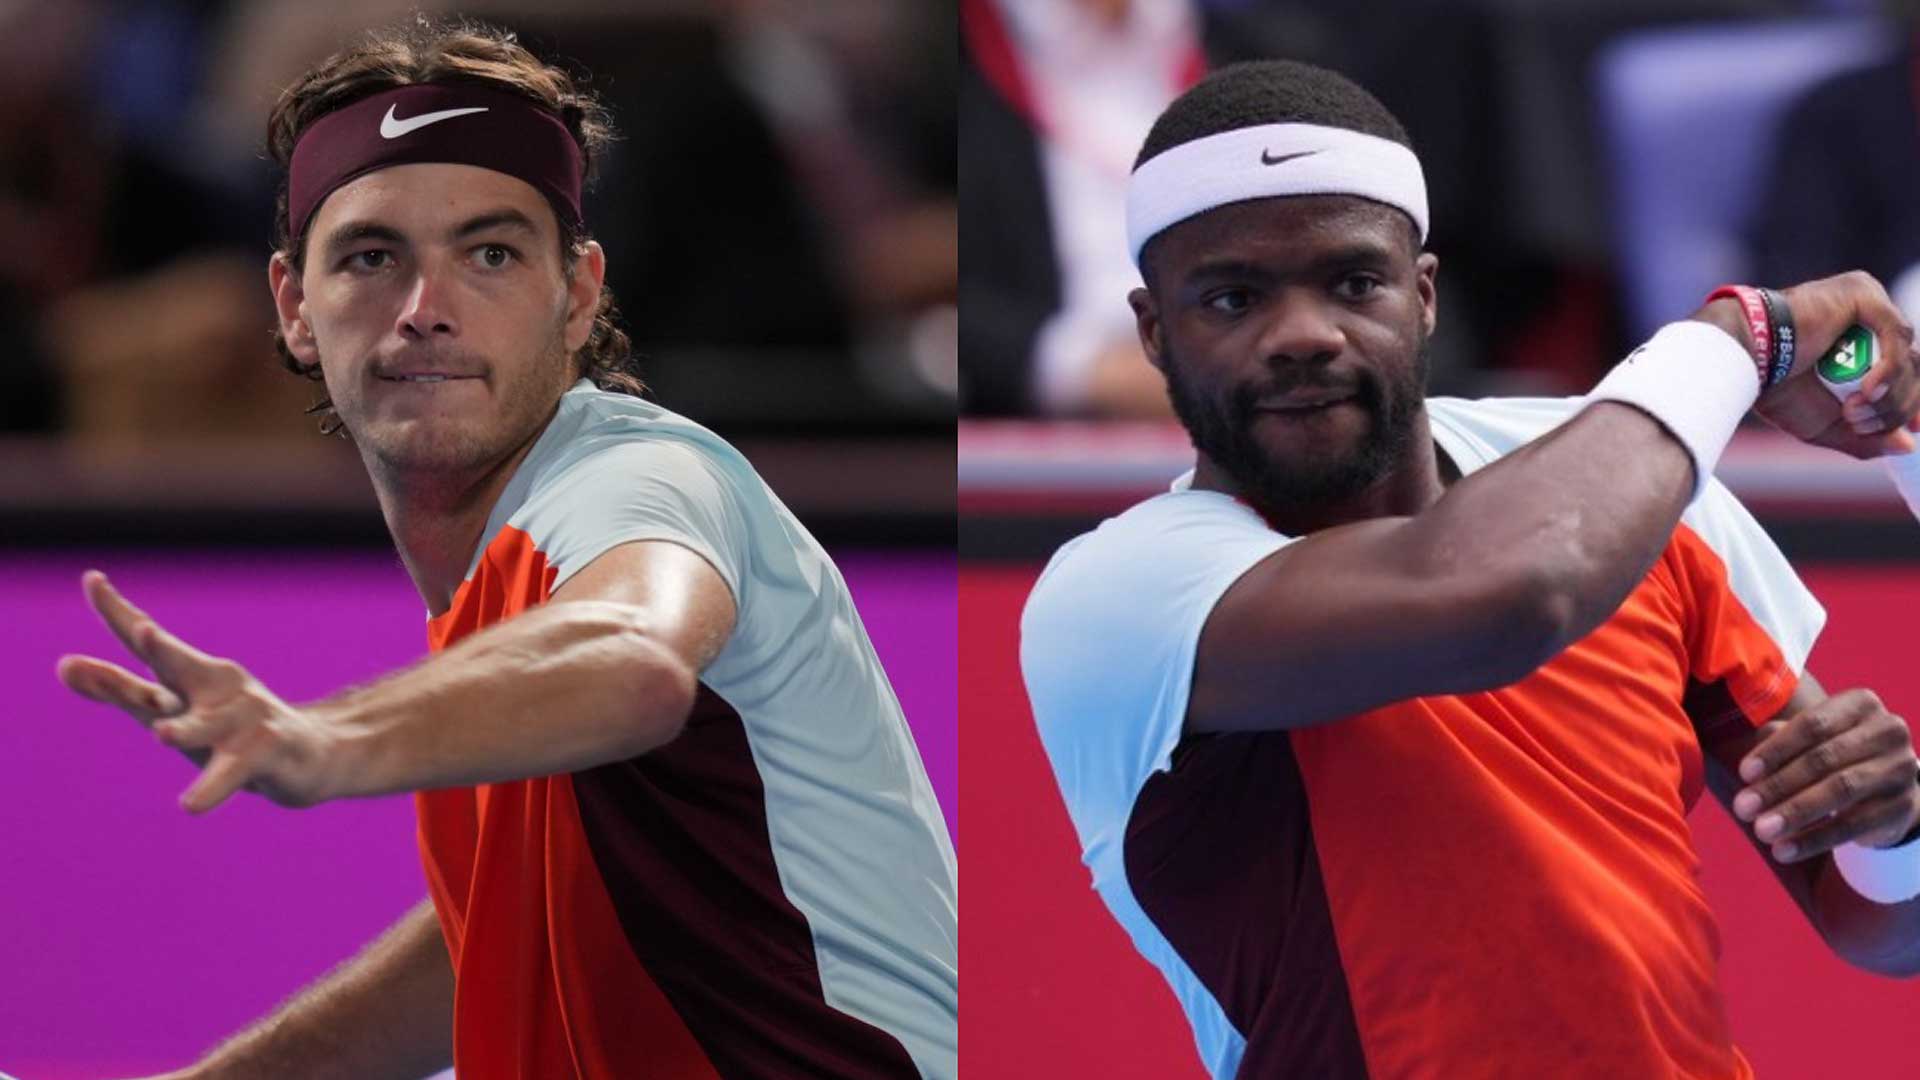 Taylor Fritz leads Frances Tiafoe 4-1 in the pair's ATP Head2Head series.